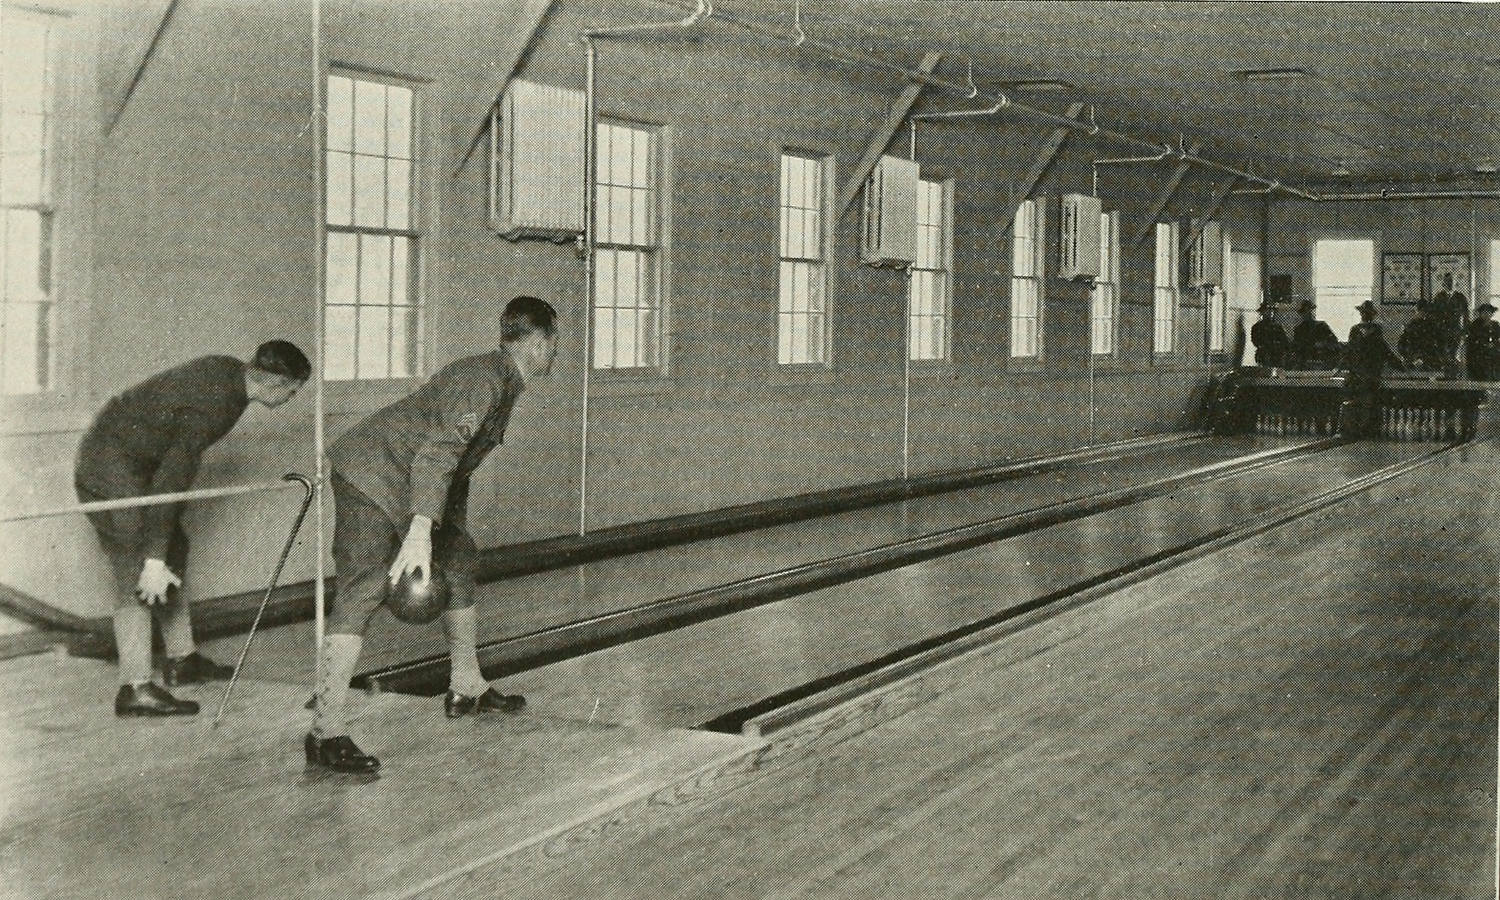 Nursing Clio Bowling alley at Evergreen – Evergreen Review Vol 1